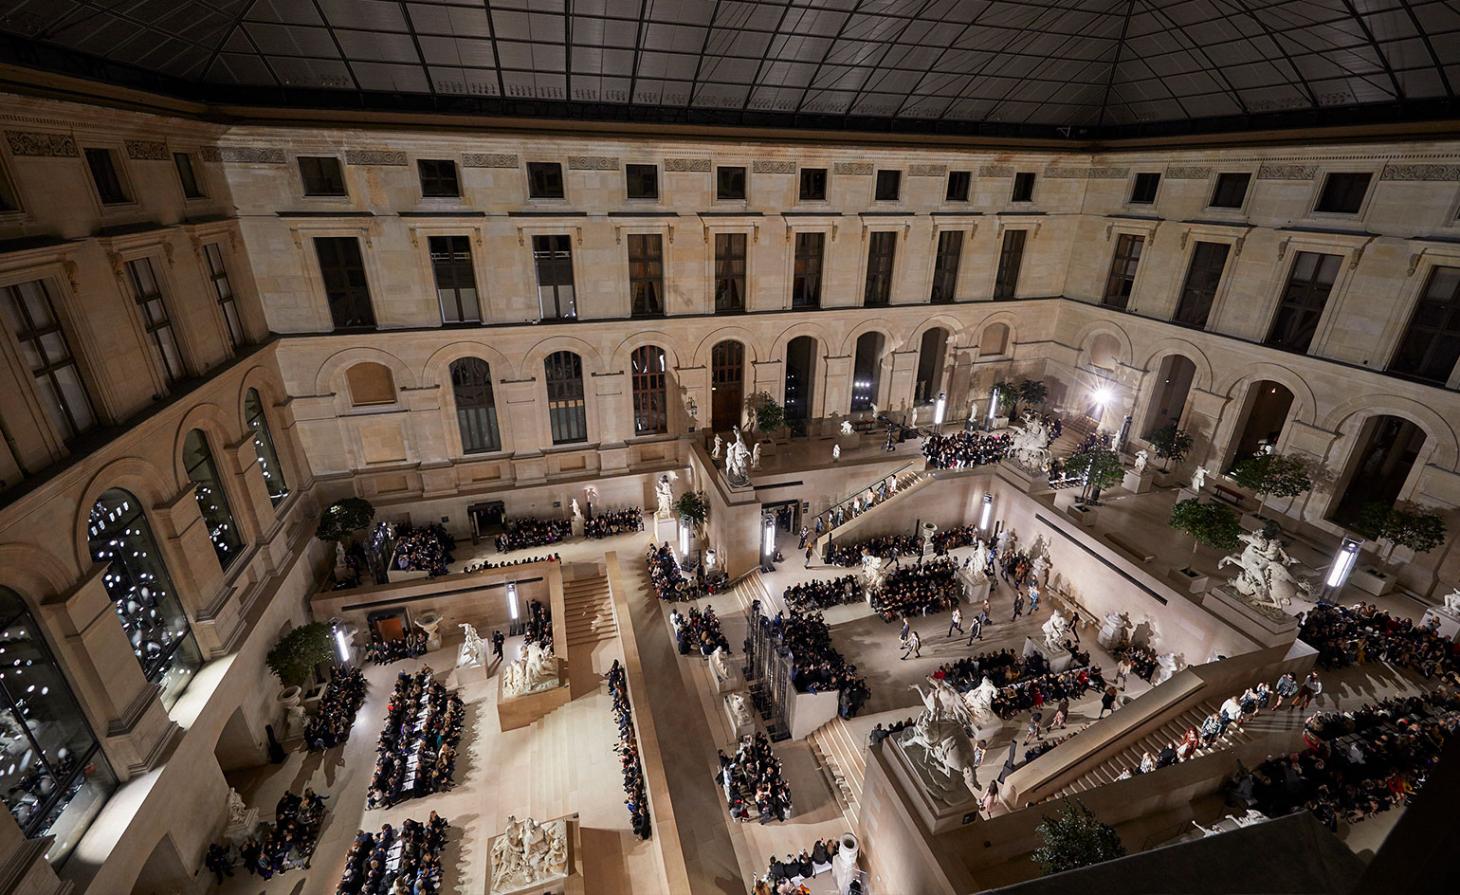 Virgil Abloh on His New Off-White Collaboration With The Louvre Museum